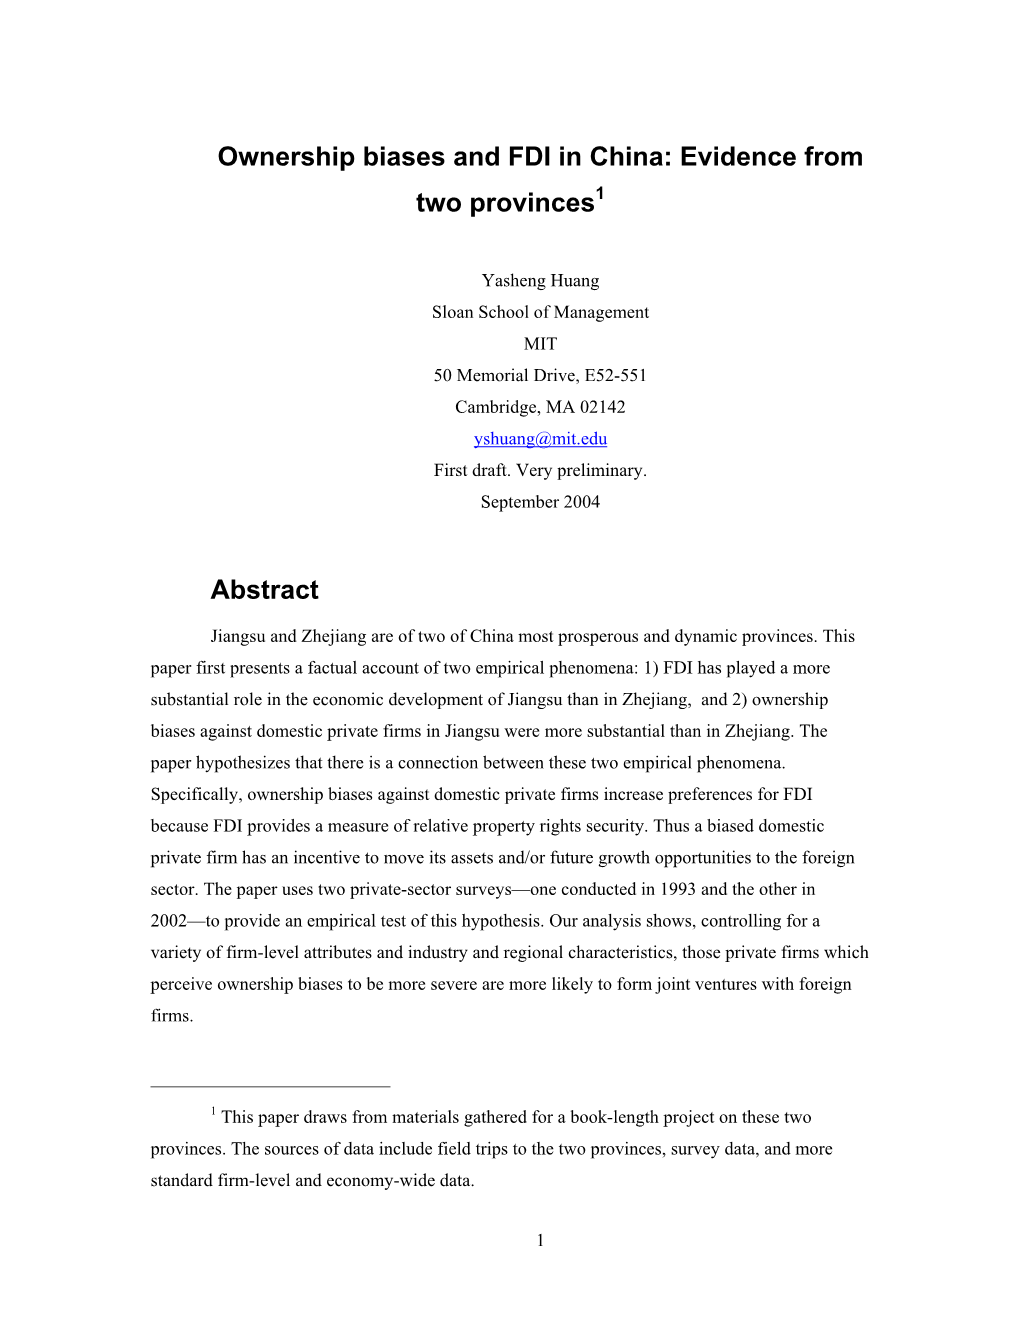 Ownership Biases and FDI in China: Evidence from Two Provinces1